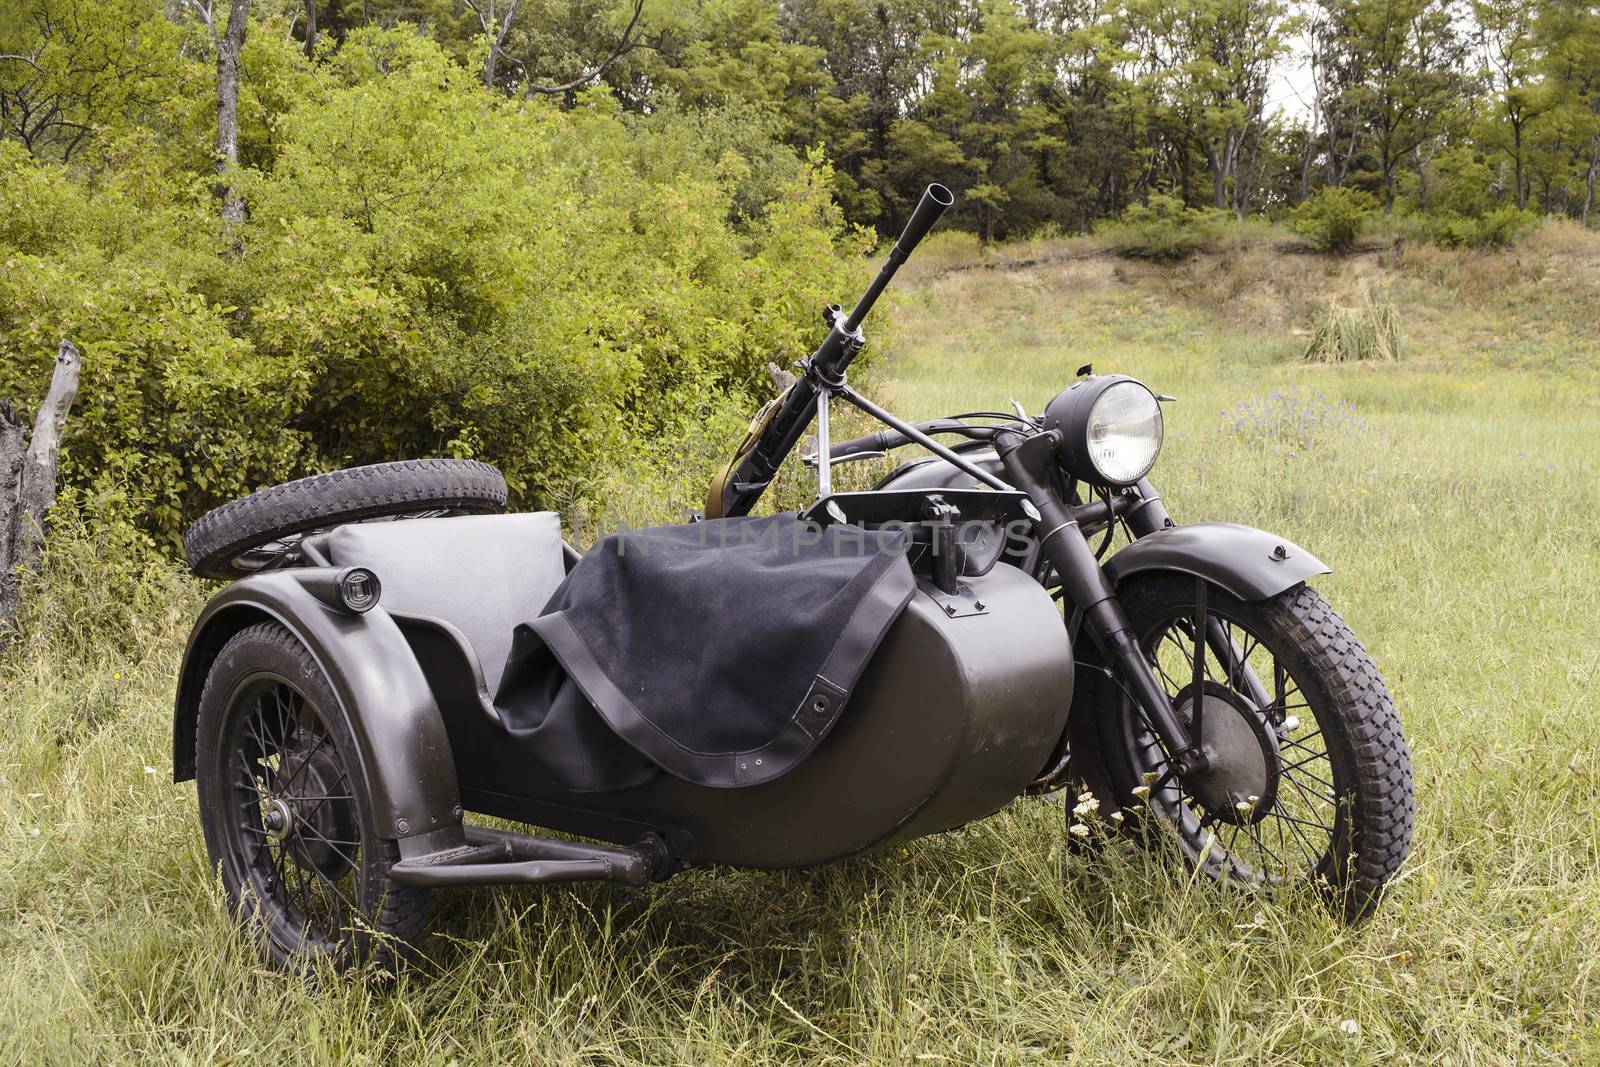 Old-fashioned Soviet motorcycle with sidecar since the Second World War, mounted with a machine gun.